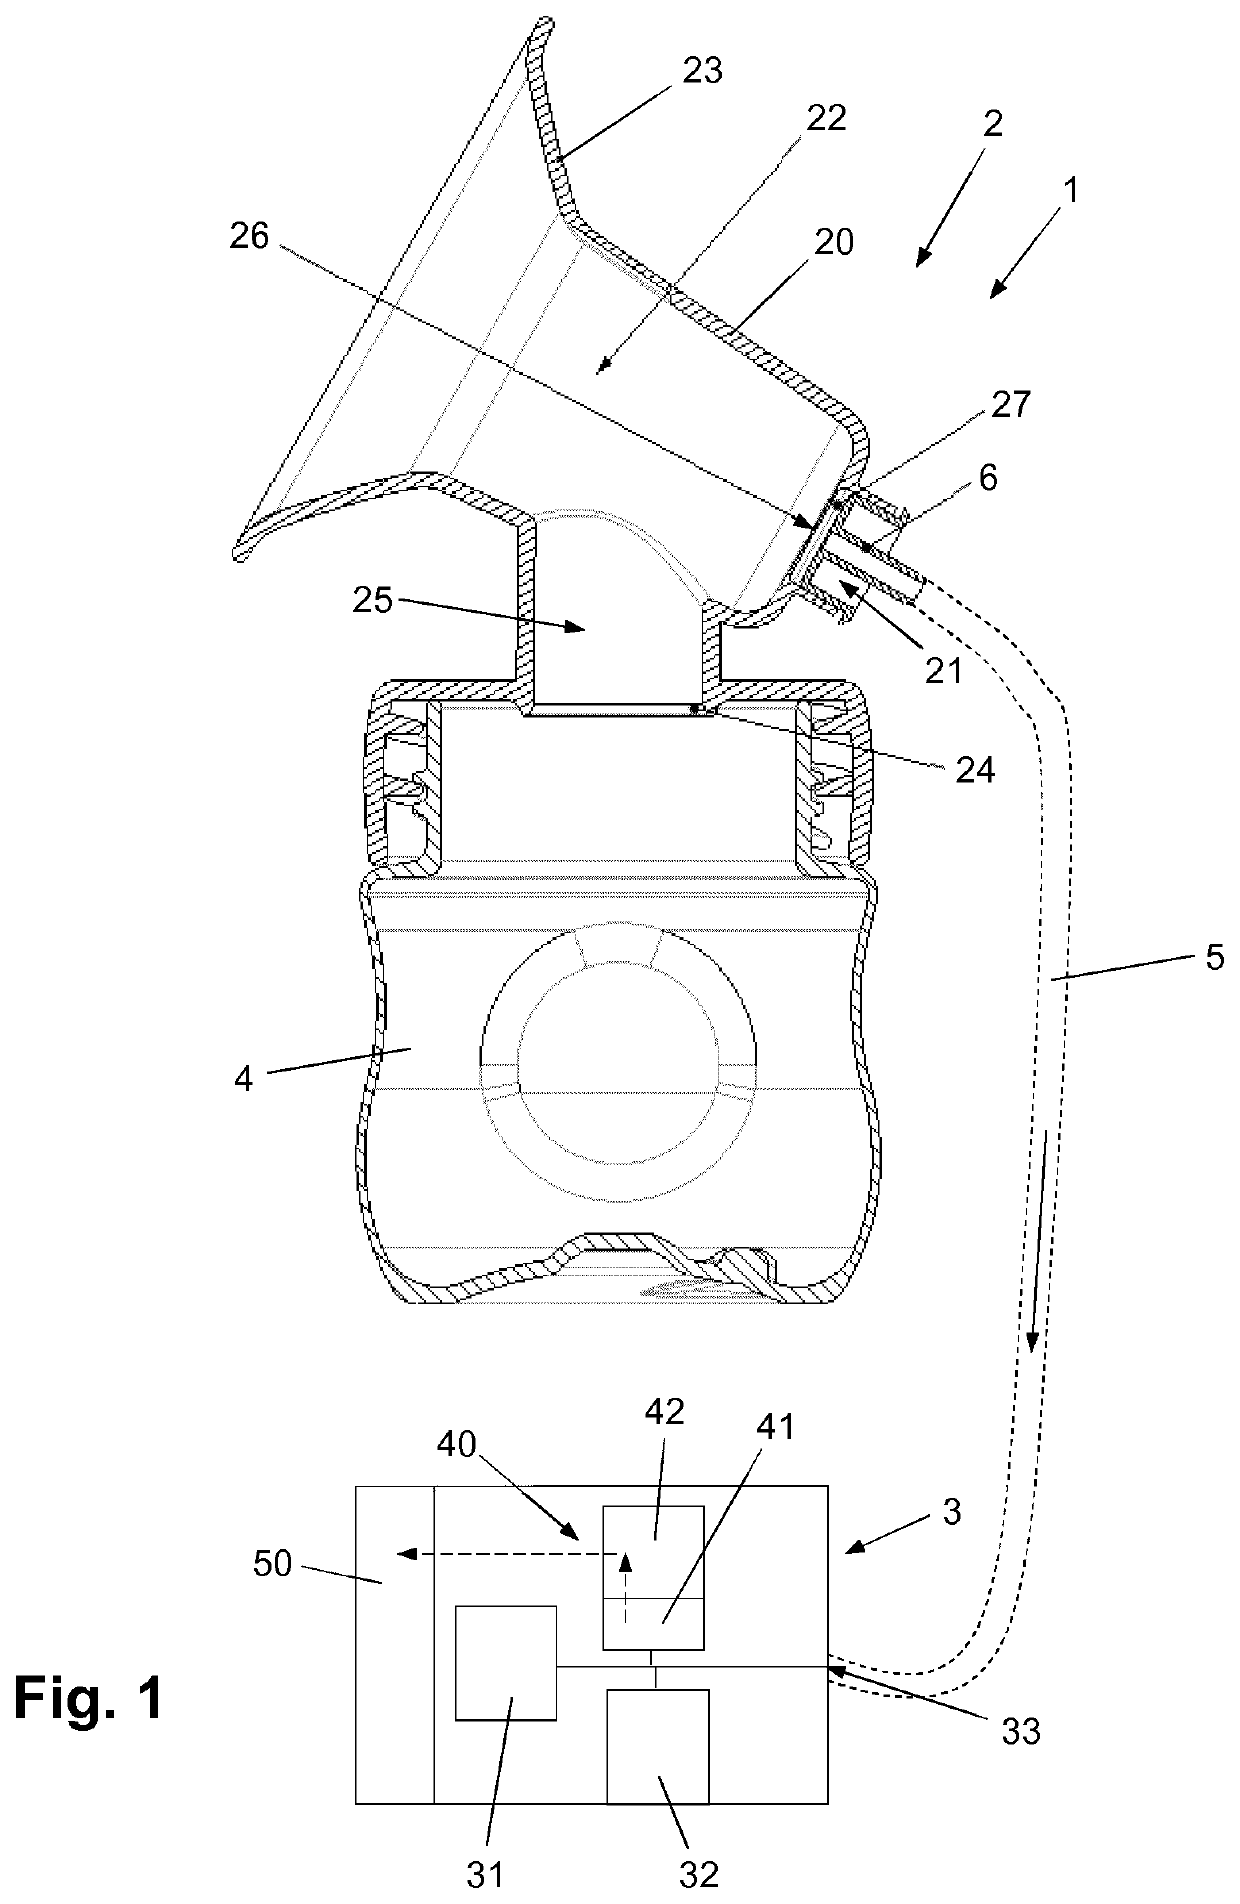 Breast pump device comprising a volatile component analysis system